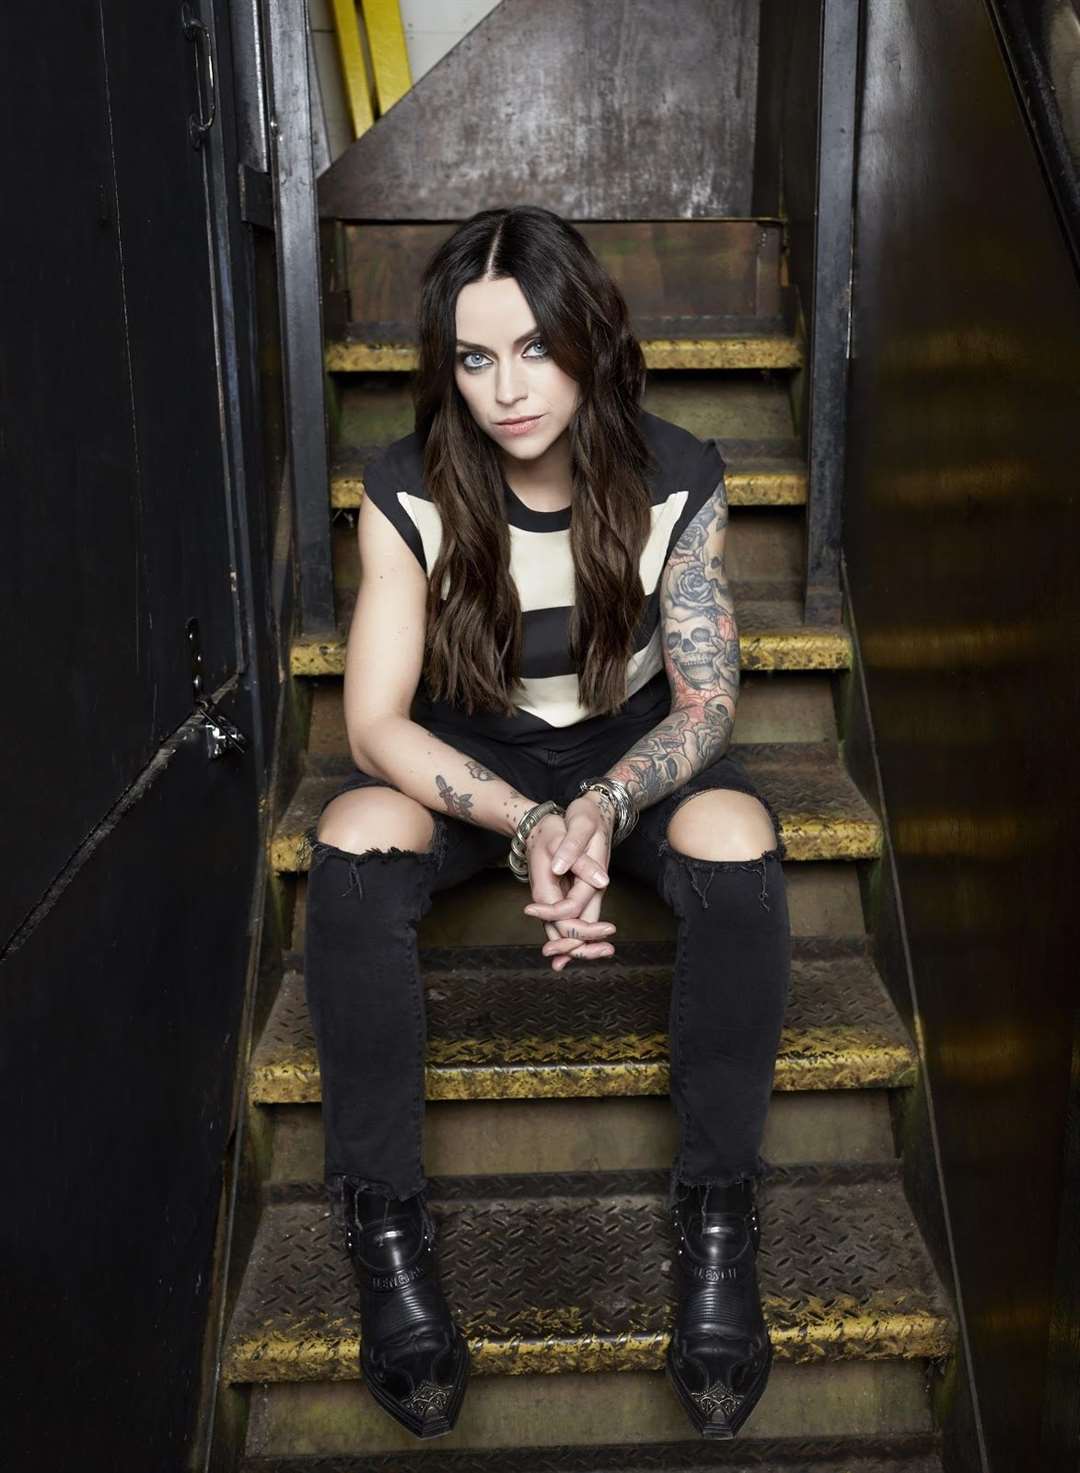 Amy Macdonald is set to be Scotland's ambassador at this year's IVW 2021.